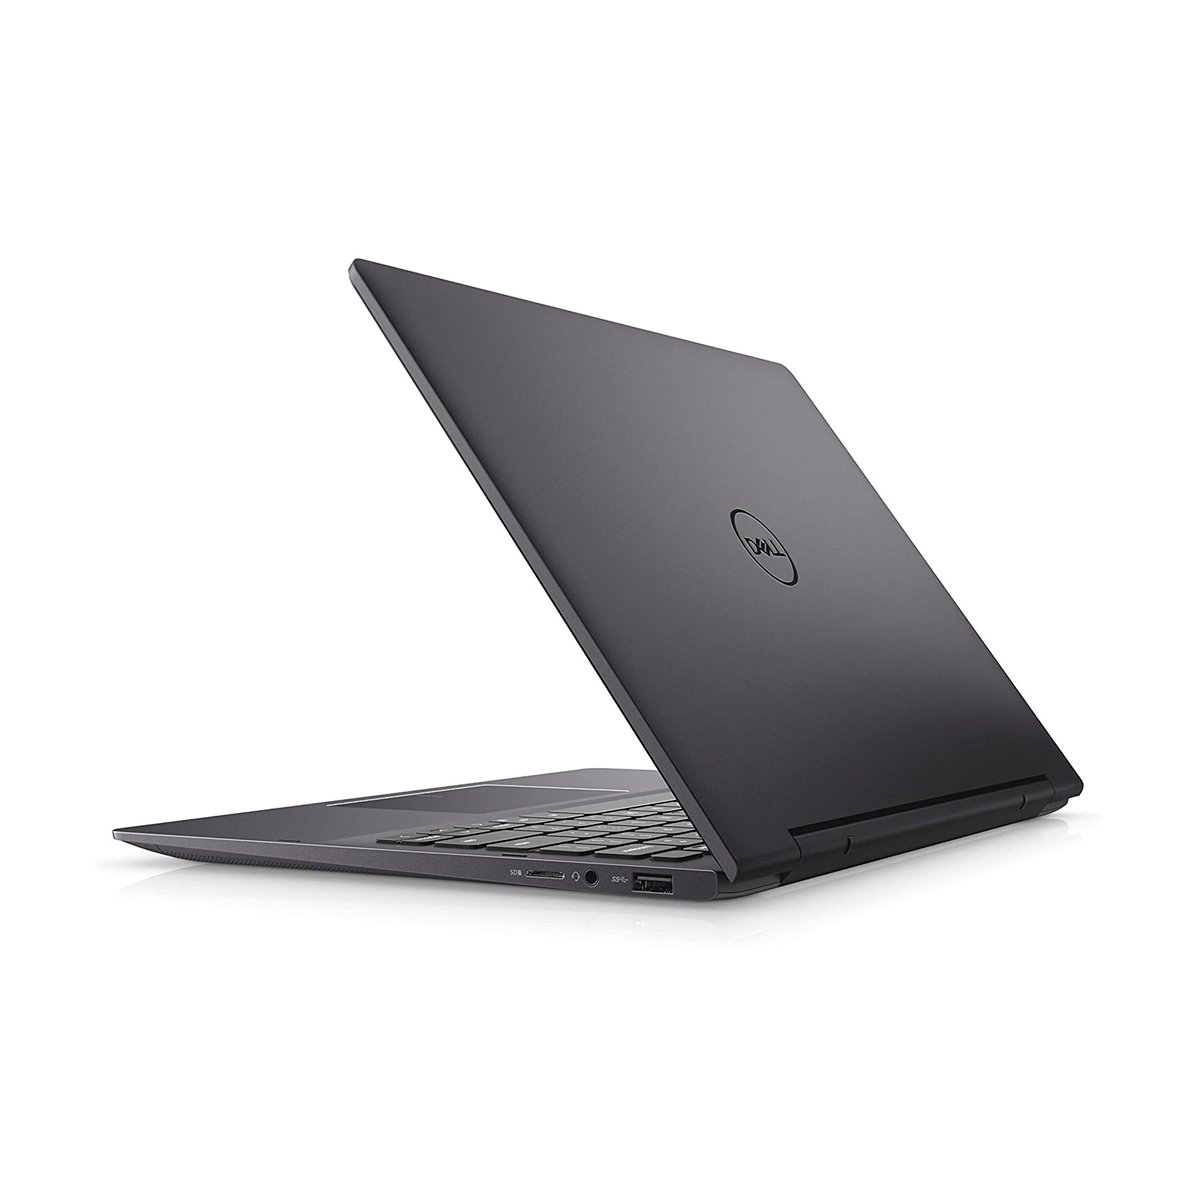 Dell Inspiron 13 7391 2-in-1 13.3 Inch FHD Convertible Laptop(7391-INS-0008),Intel Core i5-10210U, 8 GB RAM, 512 GB SSD,Intel® UHD Graphics 620 with shared graphics memory, Windows 10,Black